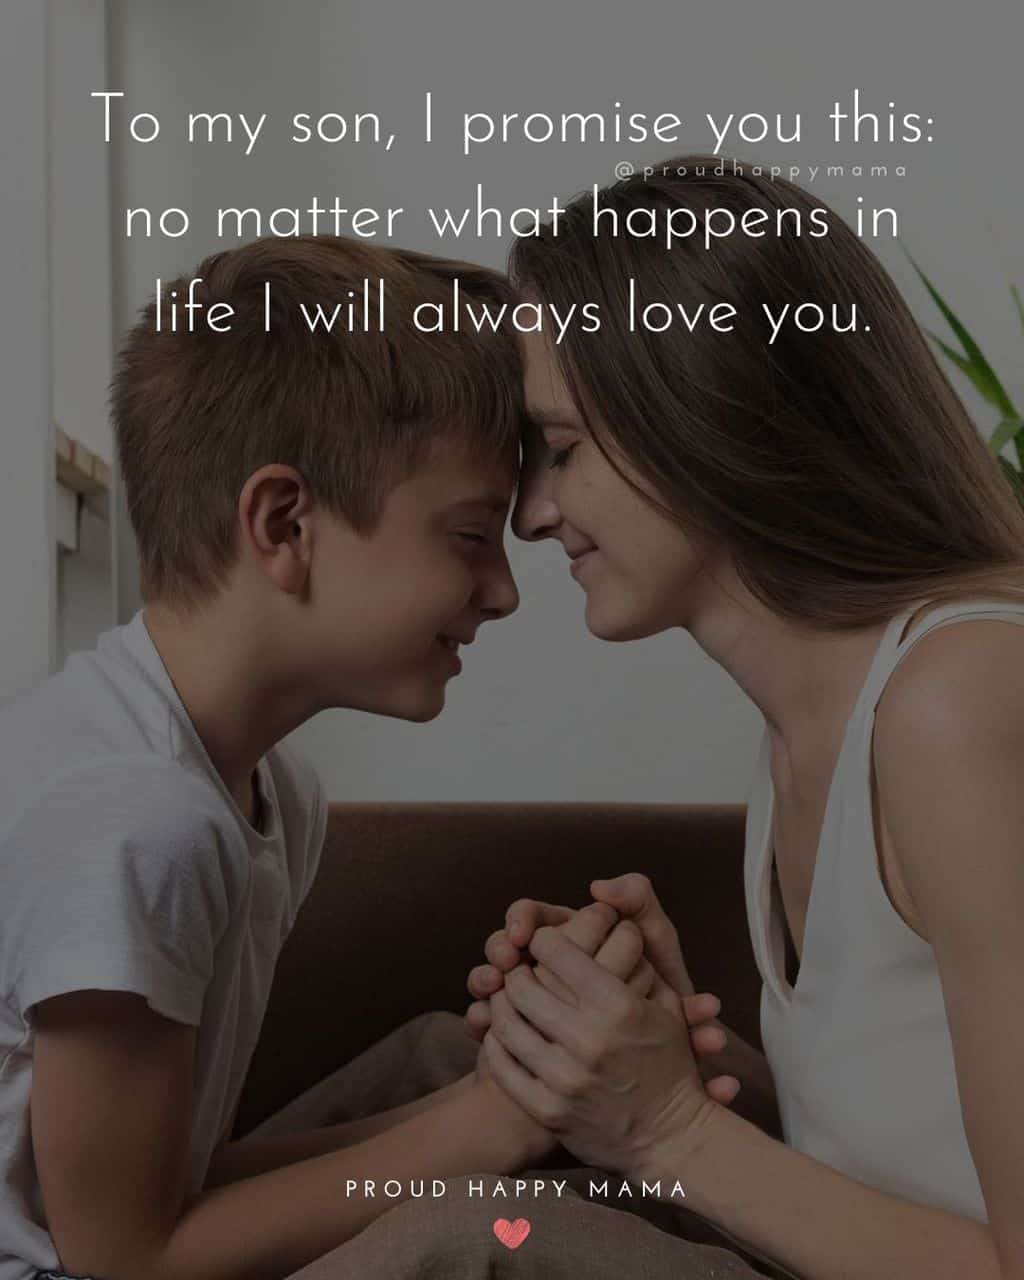 Son Quotes - To my son, I promise you this: no matter what happens in life I will always love you.’